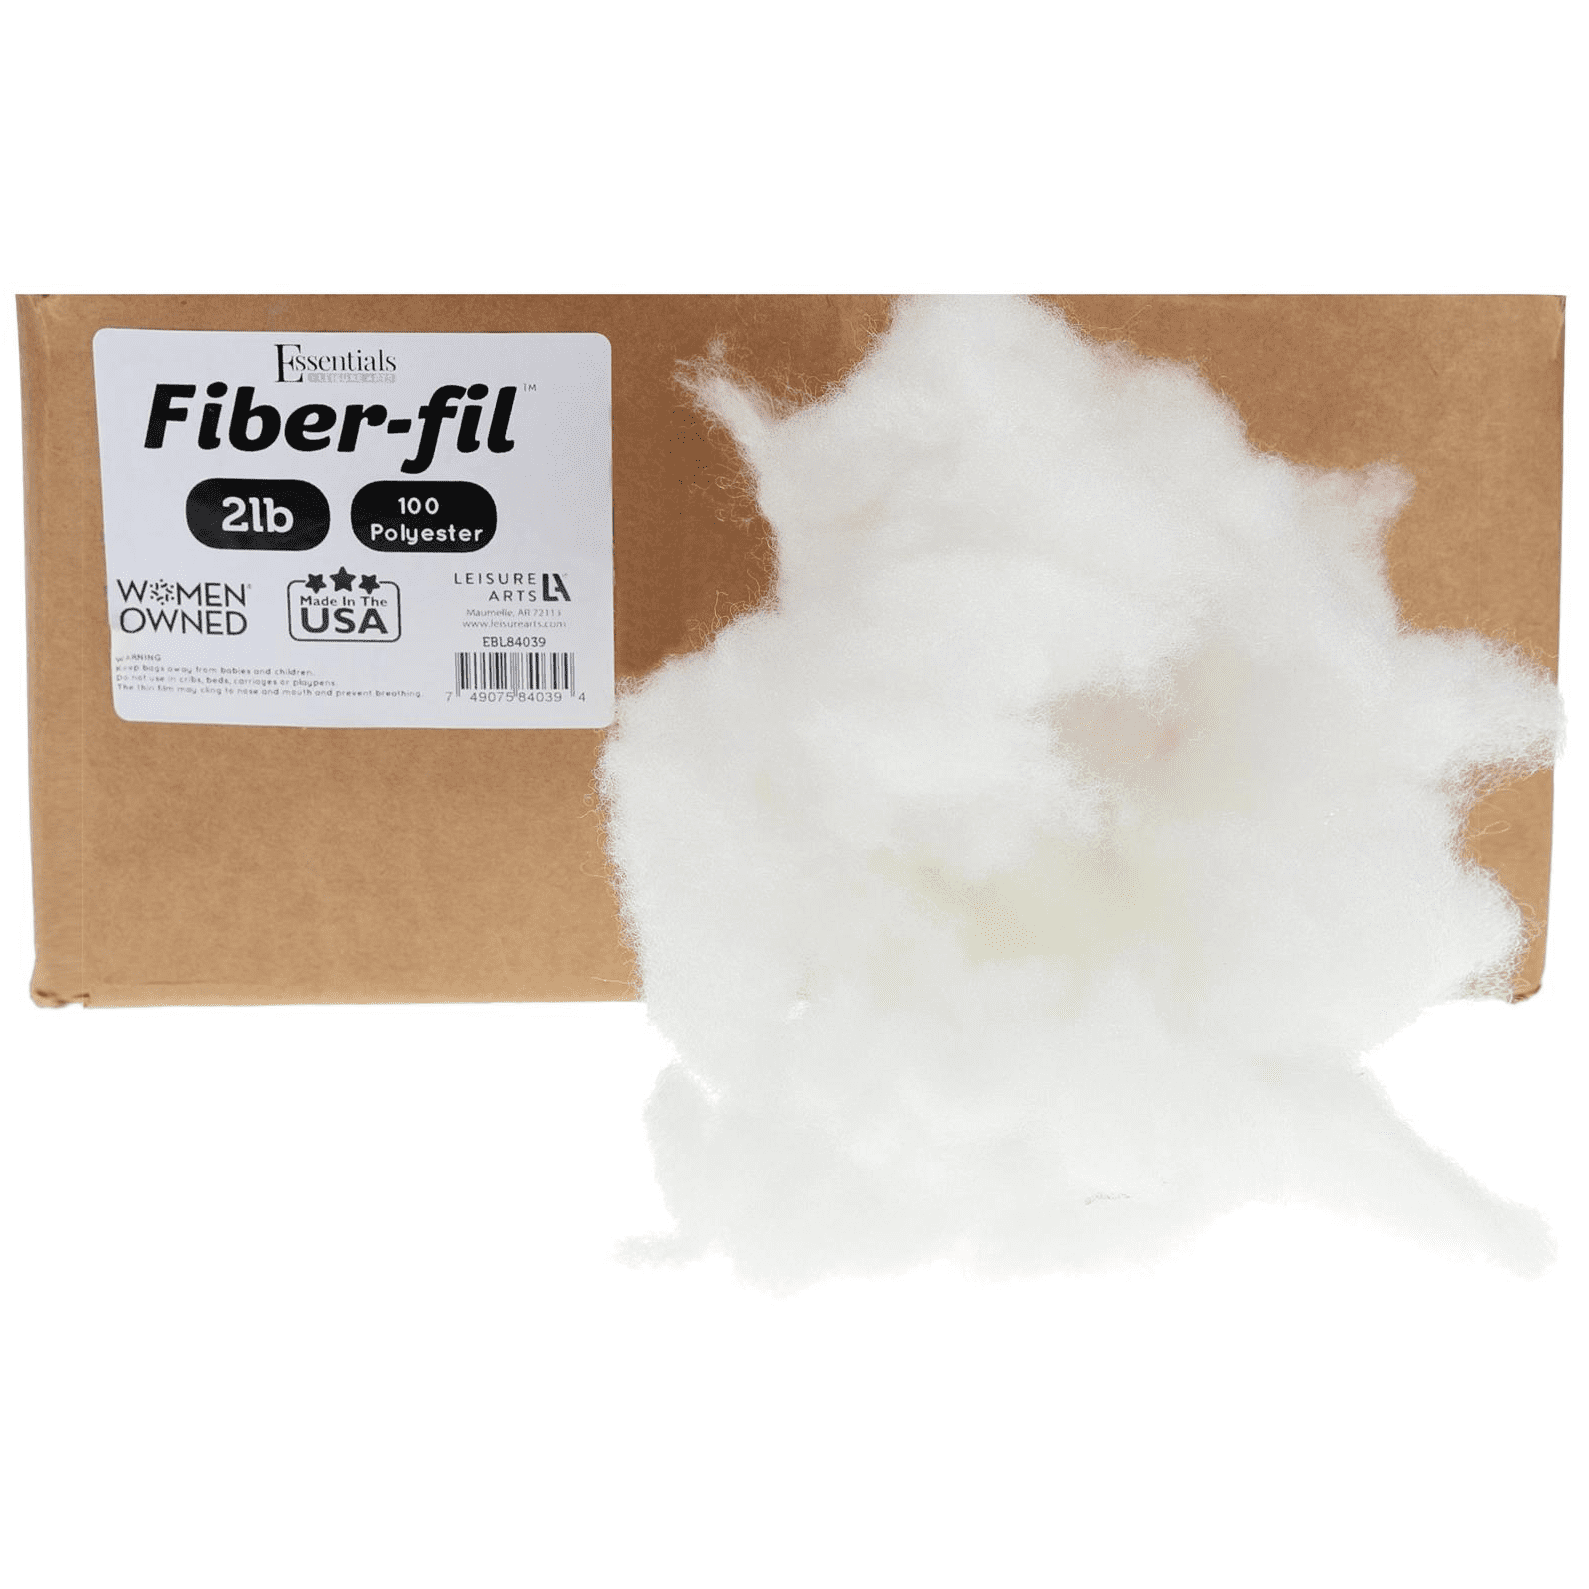 Essentials by Leisure Arts Polyester Fiber-Fil, Premium Fiber-Fil Stuffing,  2lb/32oz Box, High Resilience Polyfill for filling Stuffed Animals